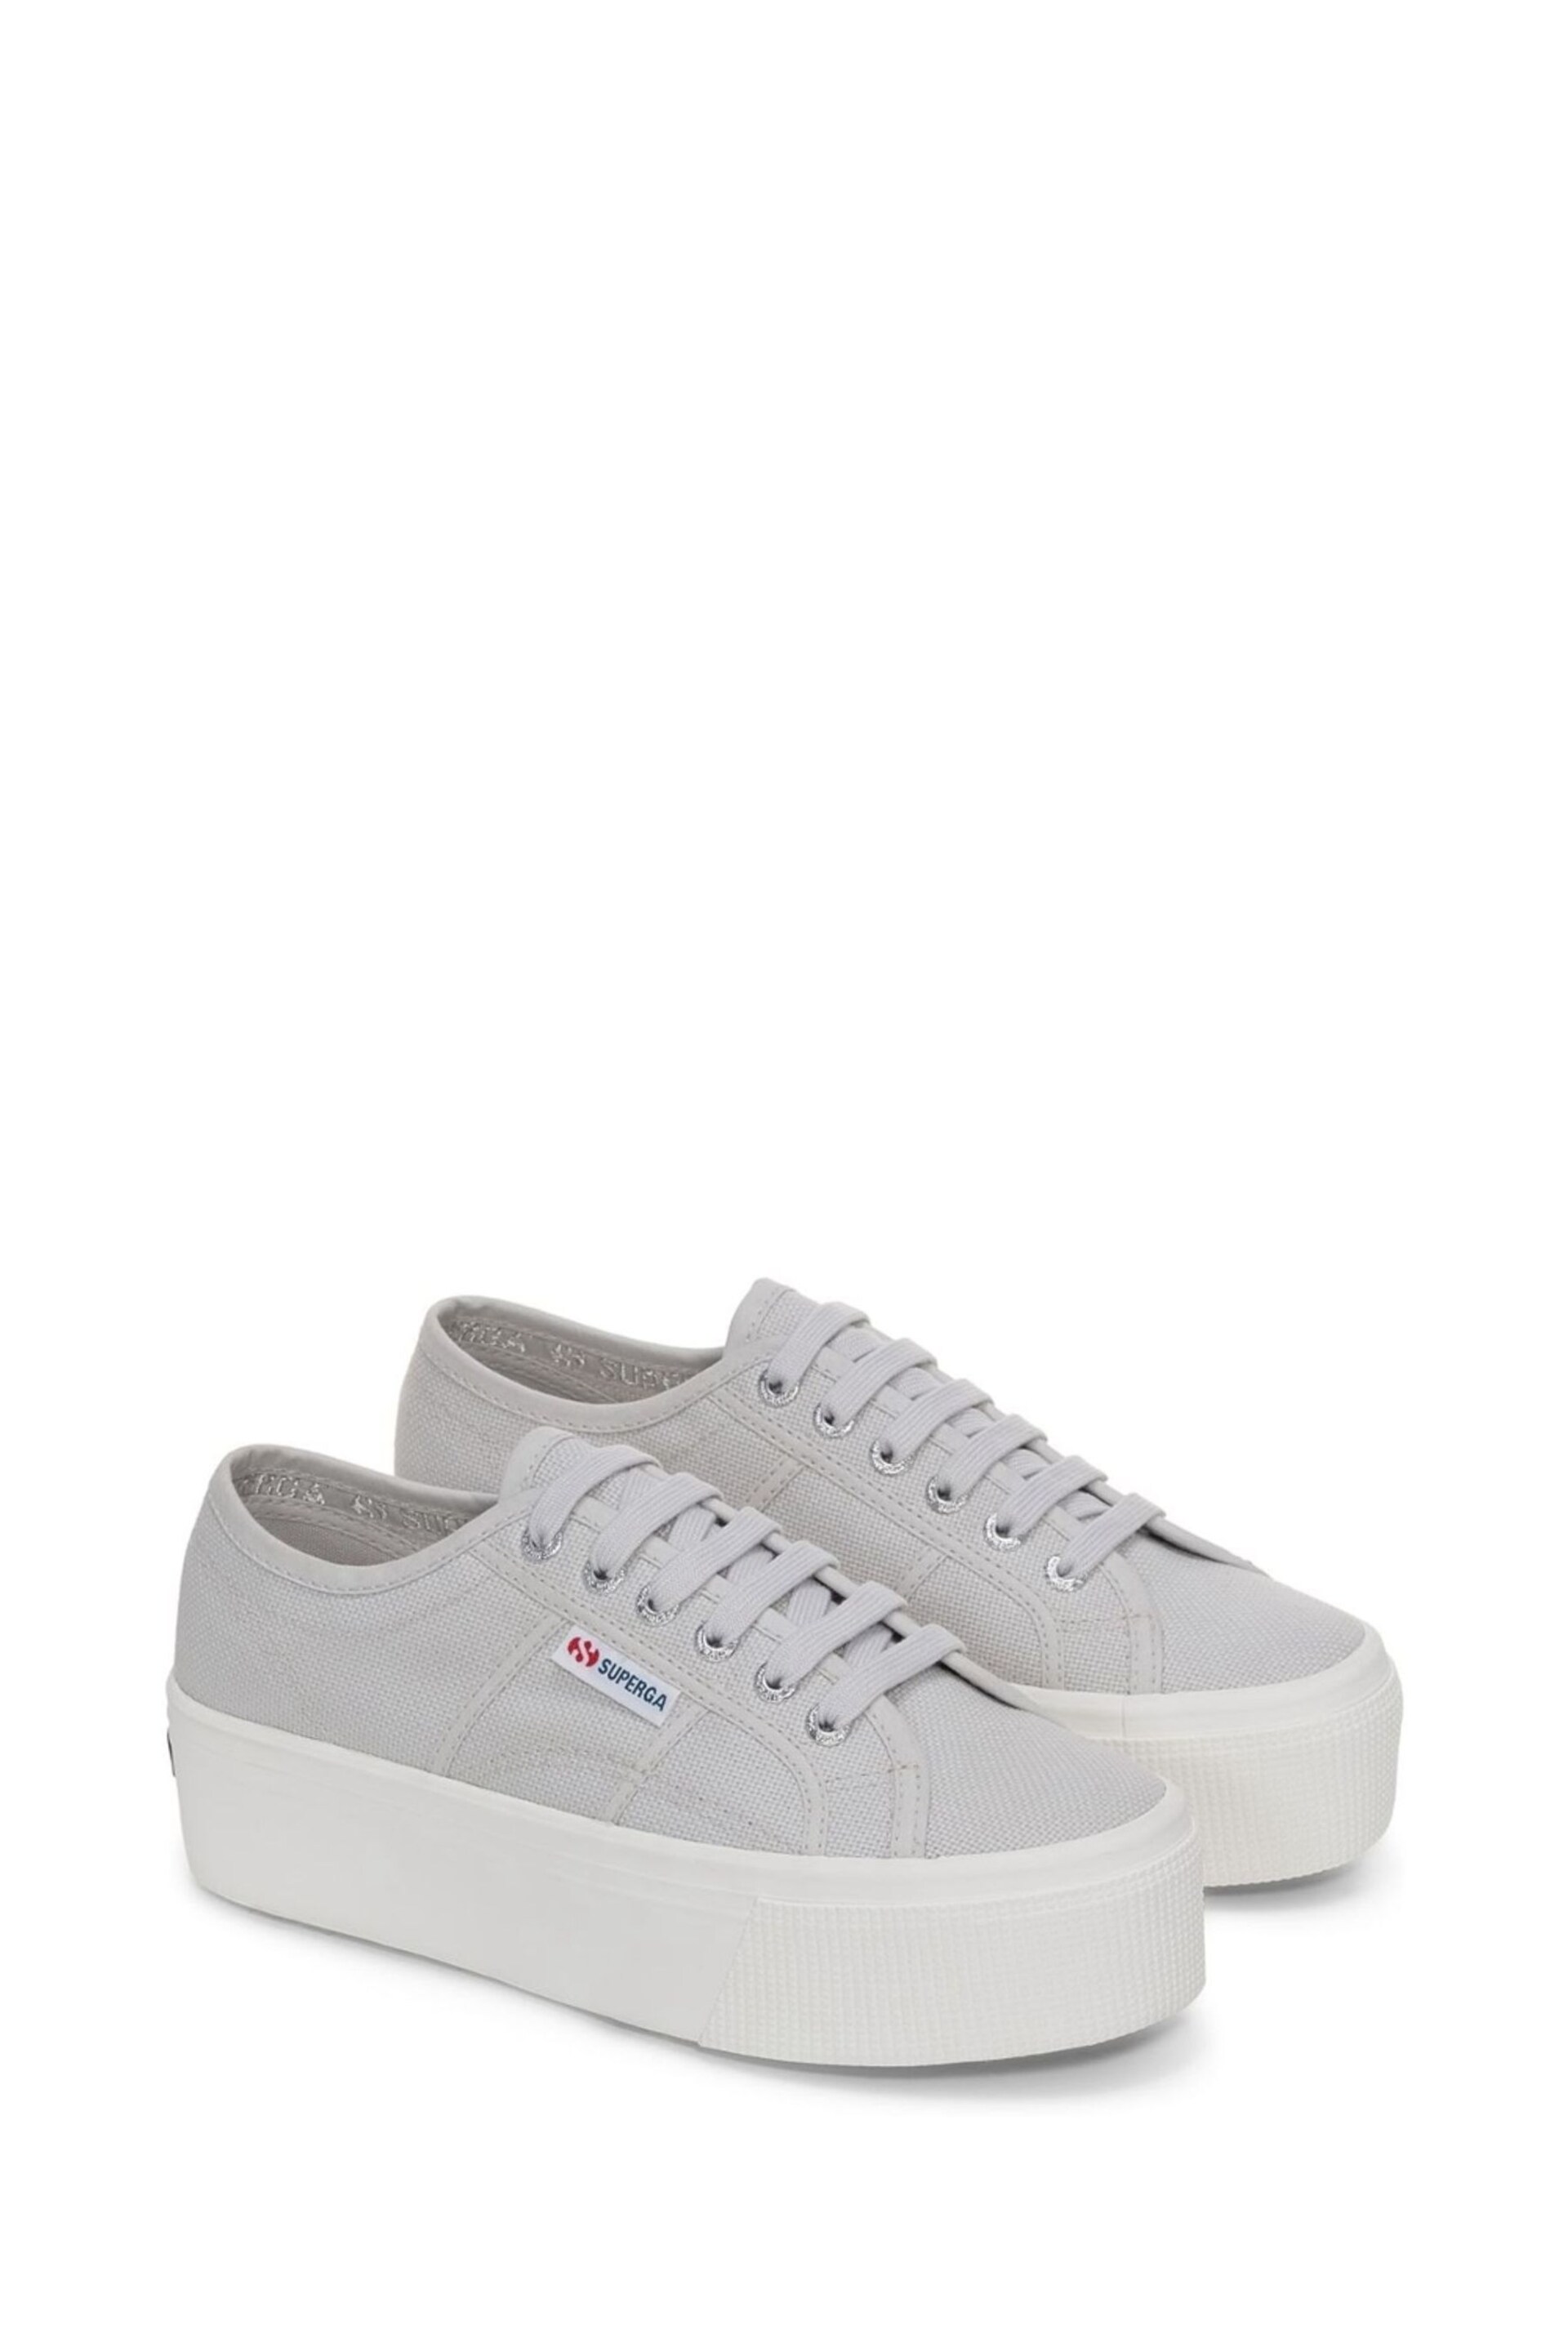 Superga Grey green 2790-Cotw Linea Up And Down Trainers - Image 2 of 5